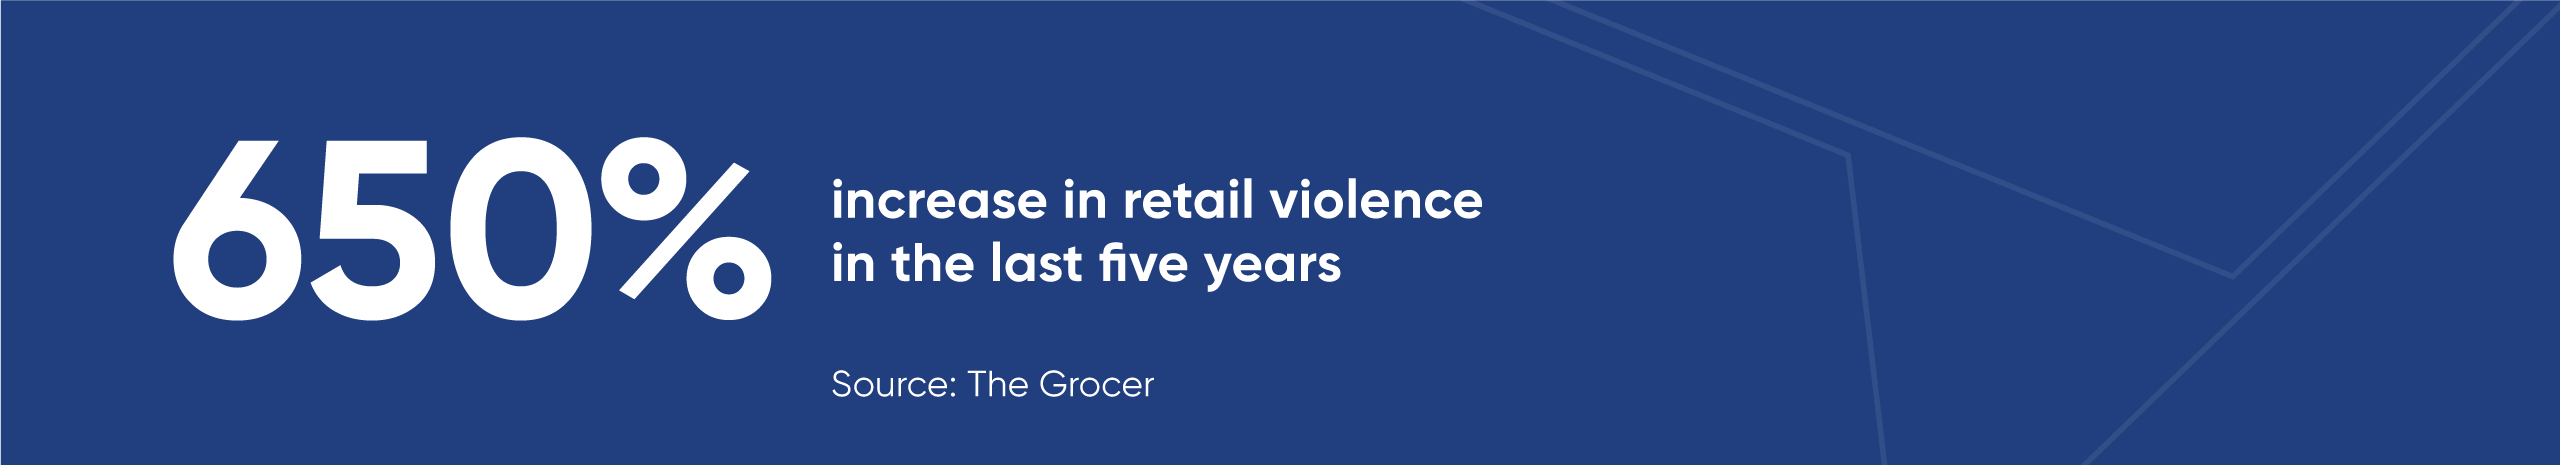 rise-in-retail-violence